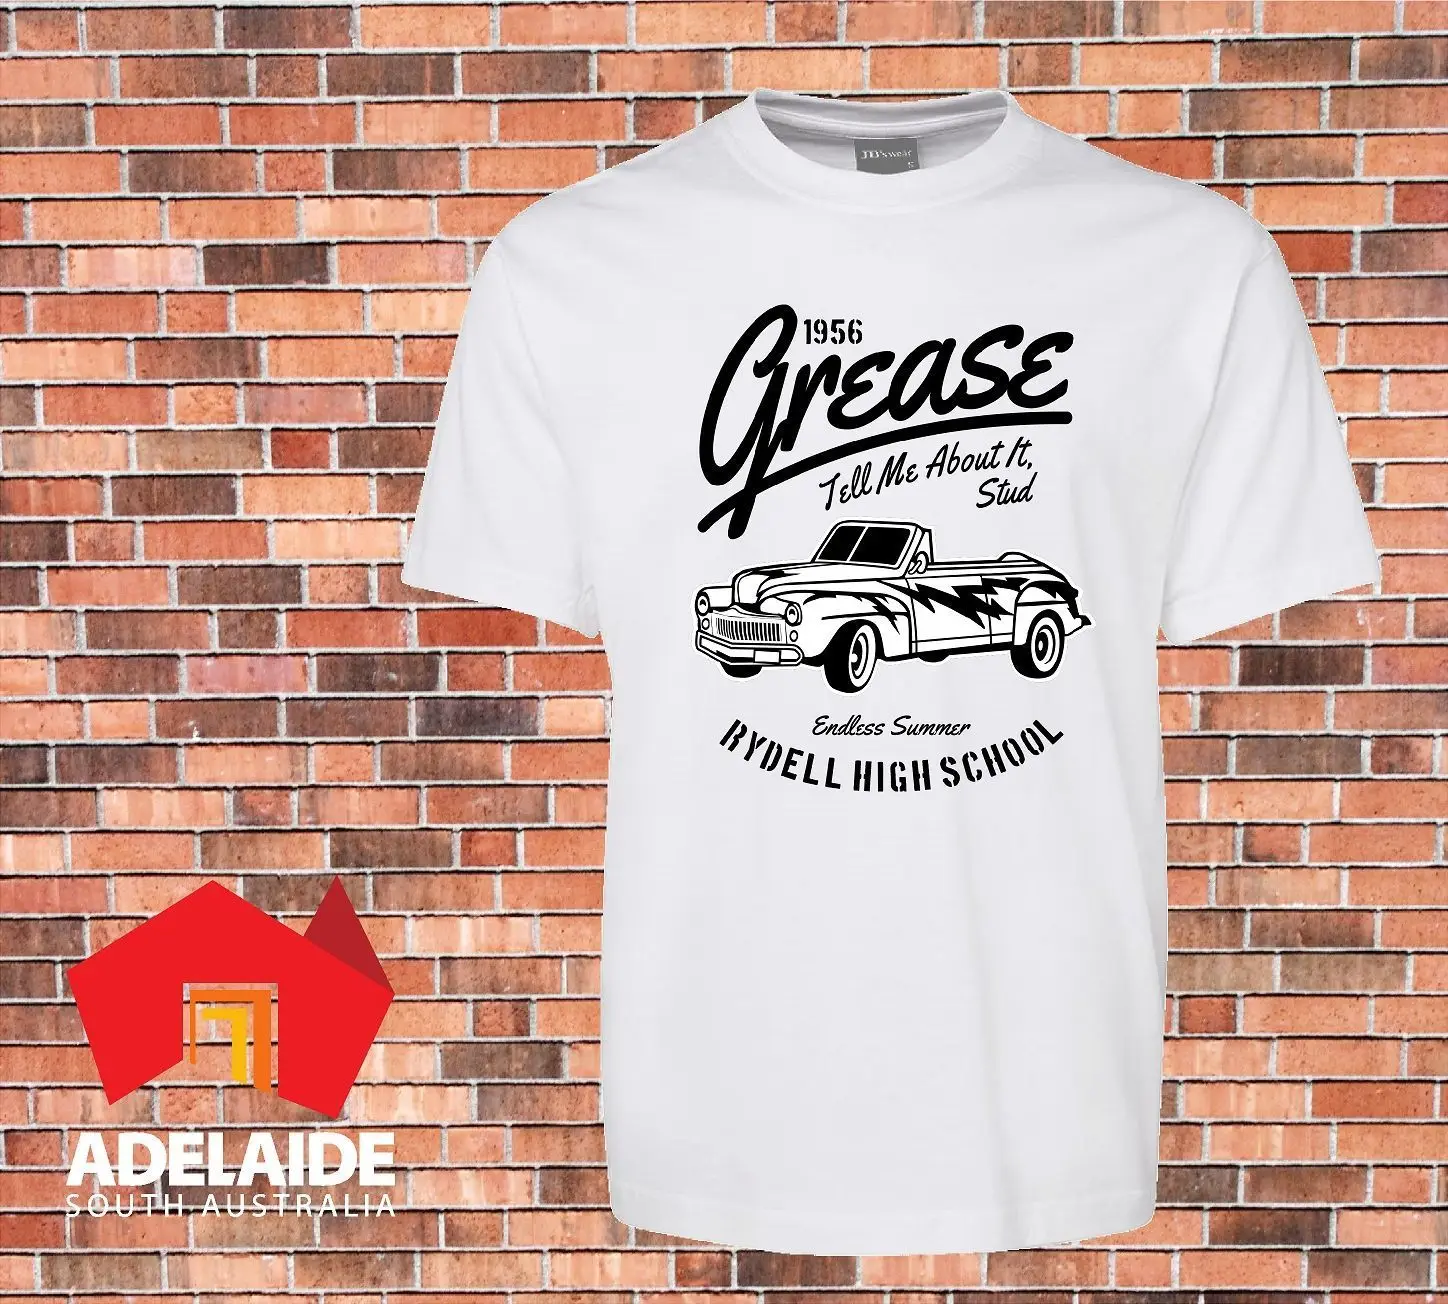 

2019 Hot sale Fashion summer style Cool Retro T-shirt Grease 1956 Rydell High School Classic Movie New Design Tee shirt